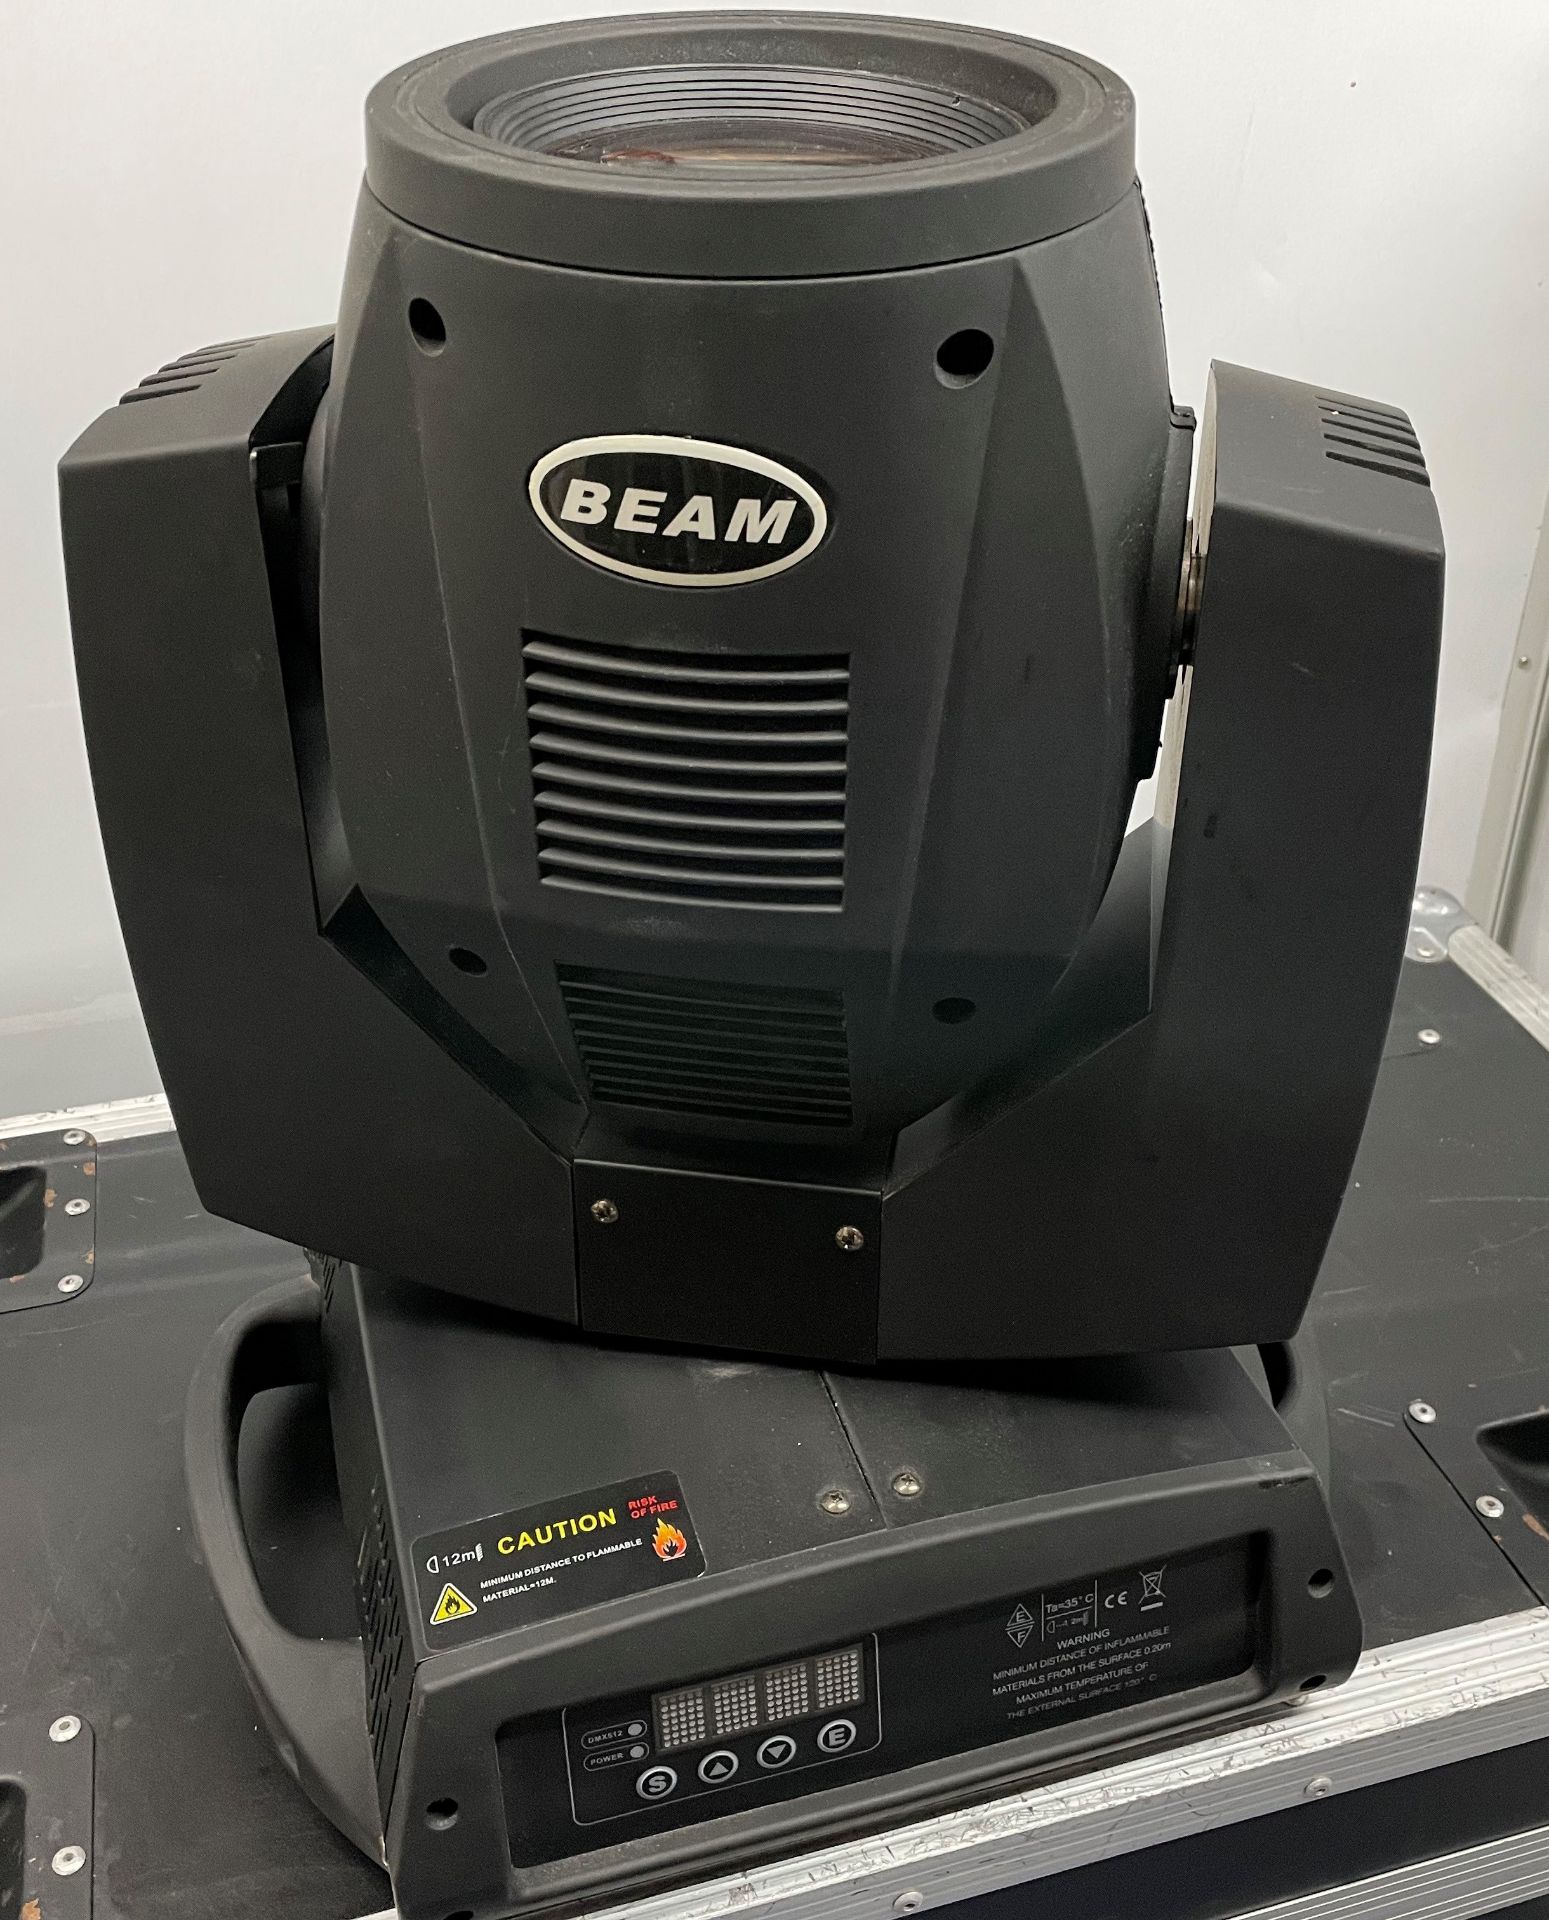 4 BEAM Model QF-2017B 200W Moving Head Spot Lights (ex hire, used condition)-located at Pro Event - Image 2 of 4